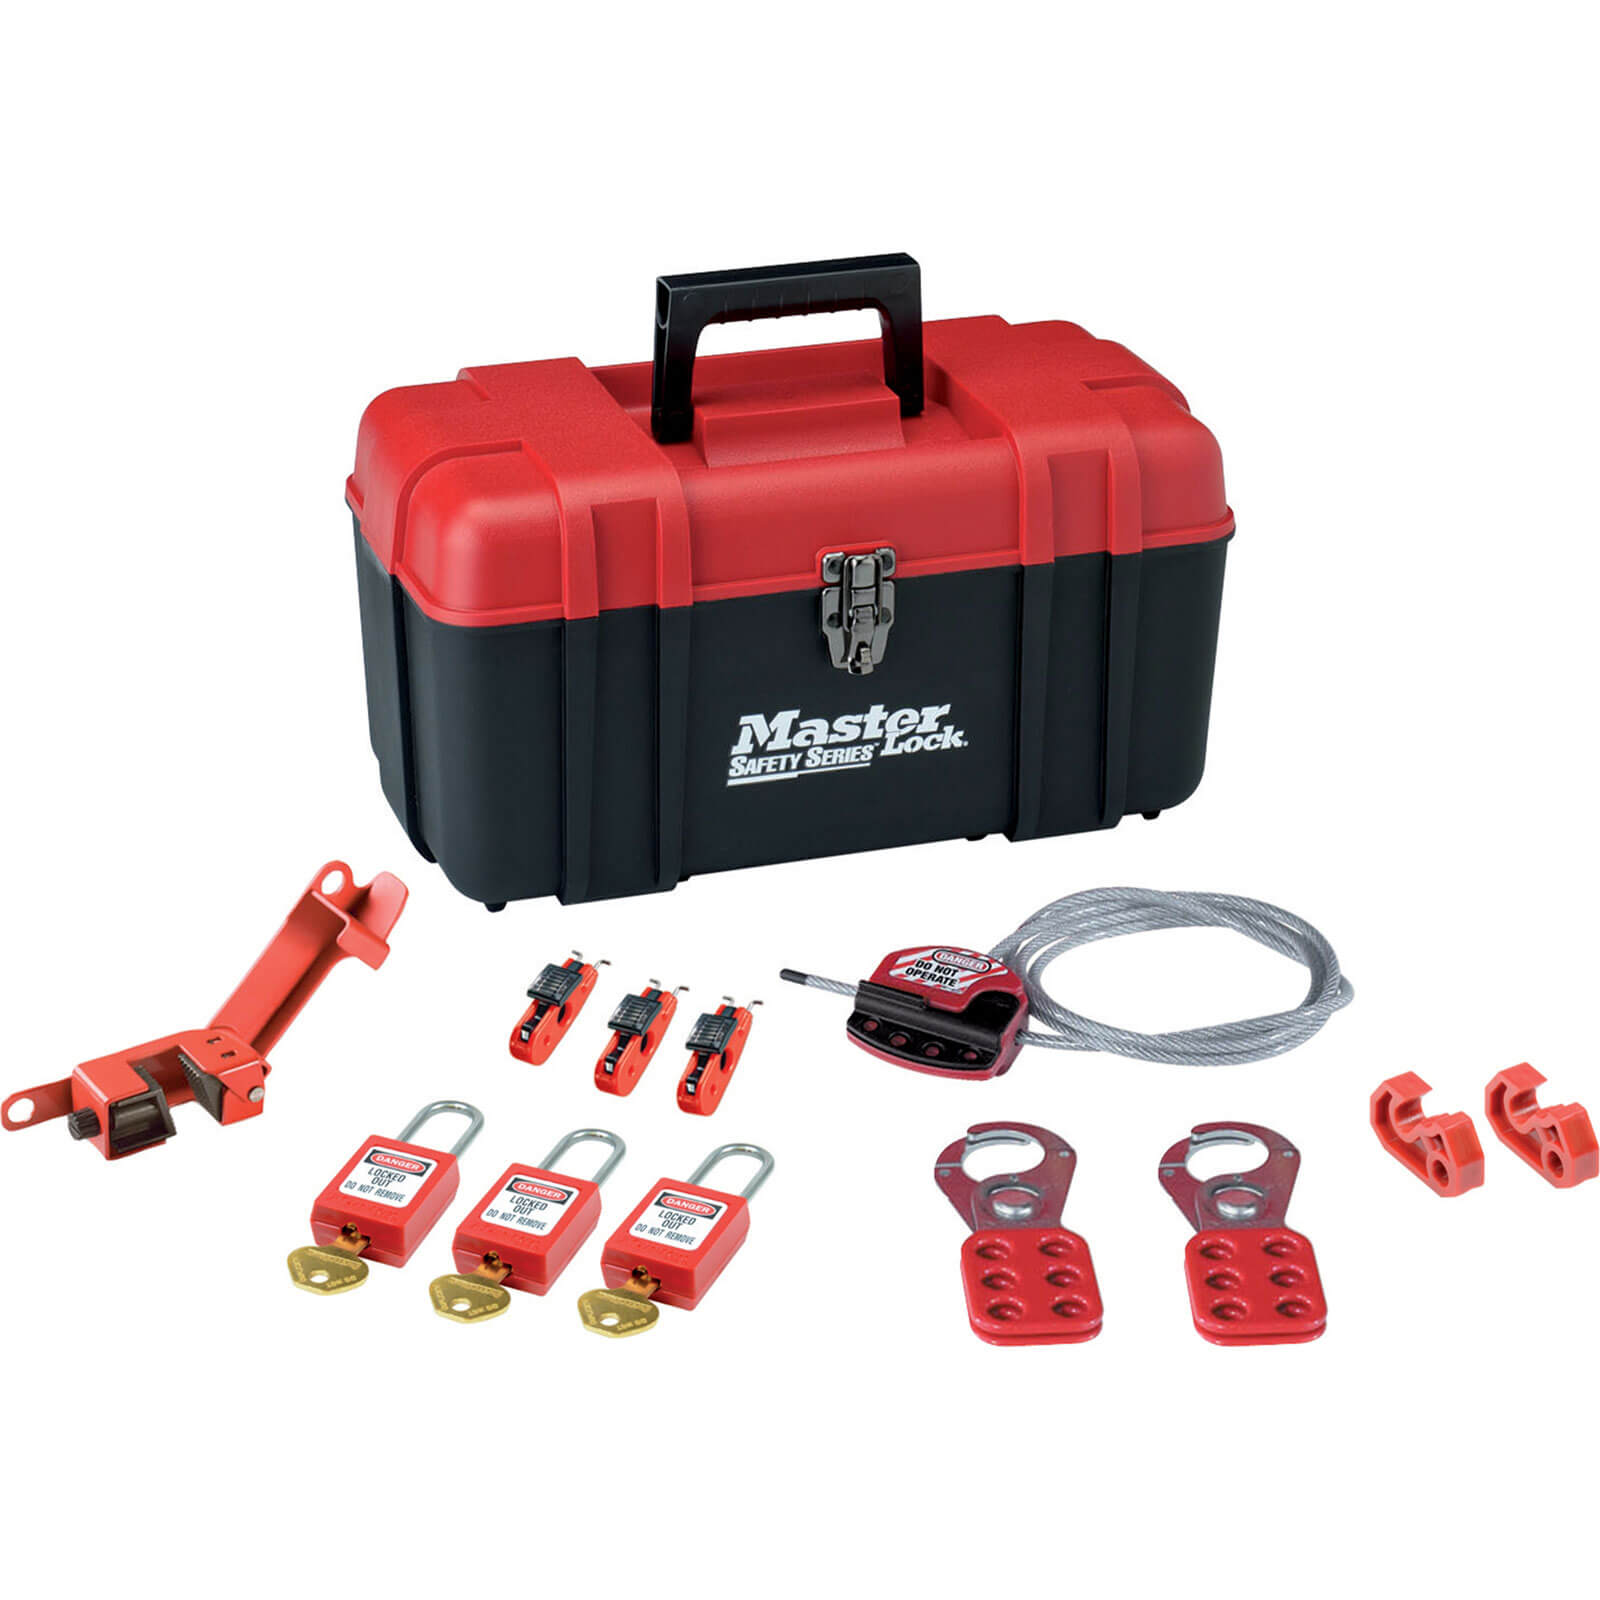 MasterLock 12 Piece Lockout Toolbox Kit for Valve & Electrical Devices